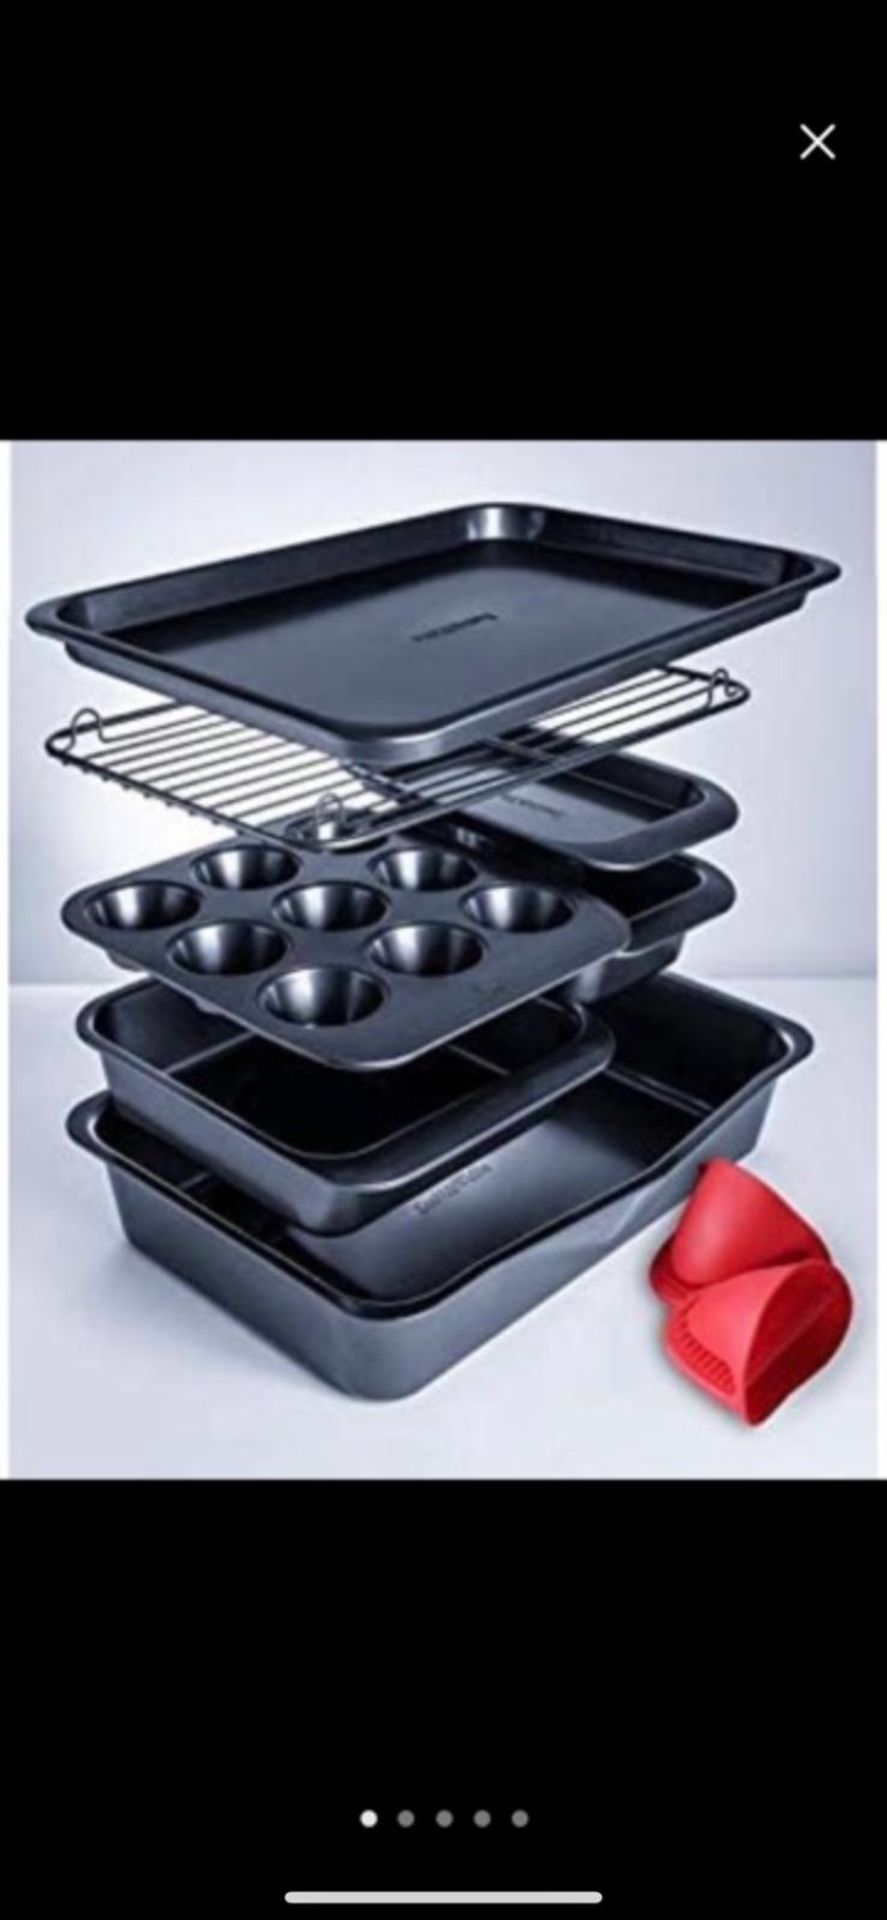 2 X NEW BOXED SCOTT & WHITE 9 PIECE EASY STORE BAKEWARE SET. RRP £89.99 EACH. THE 9 PIECE NON-STICK, - Image 2 of 2